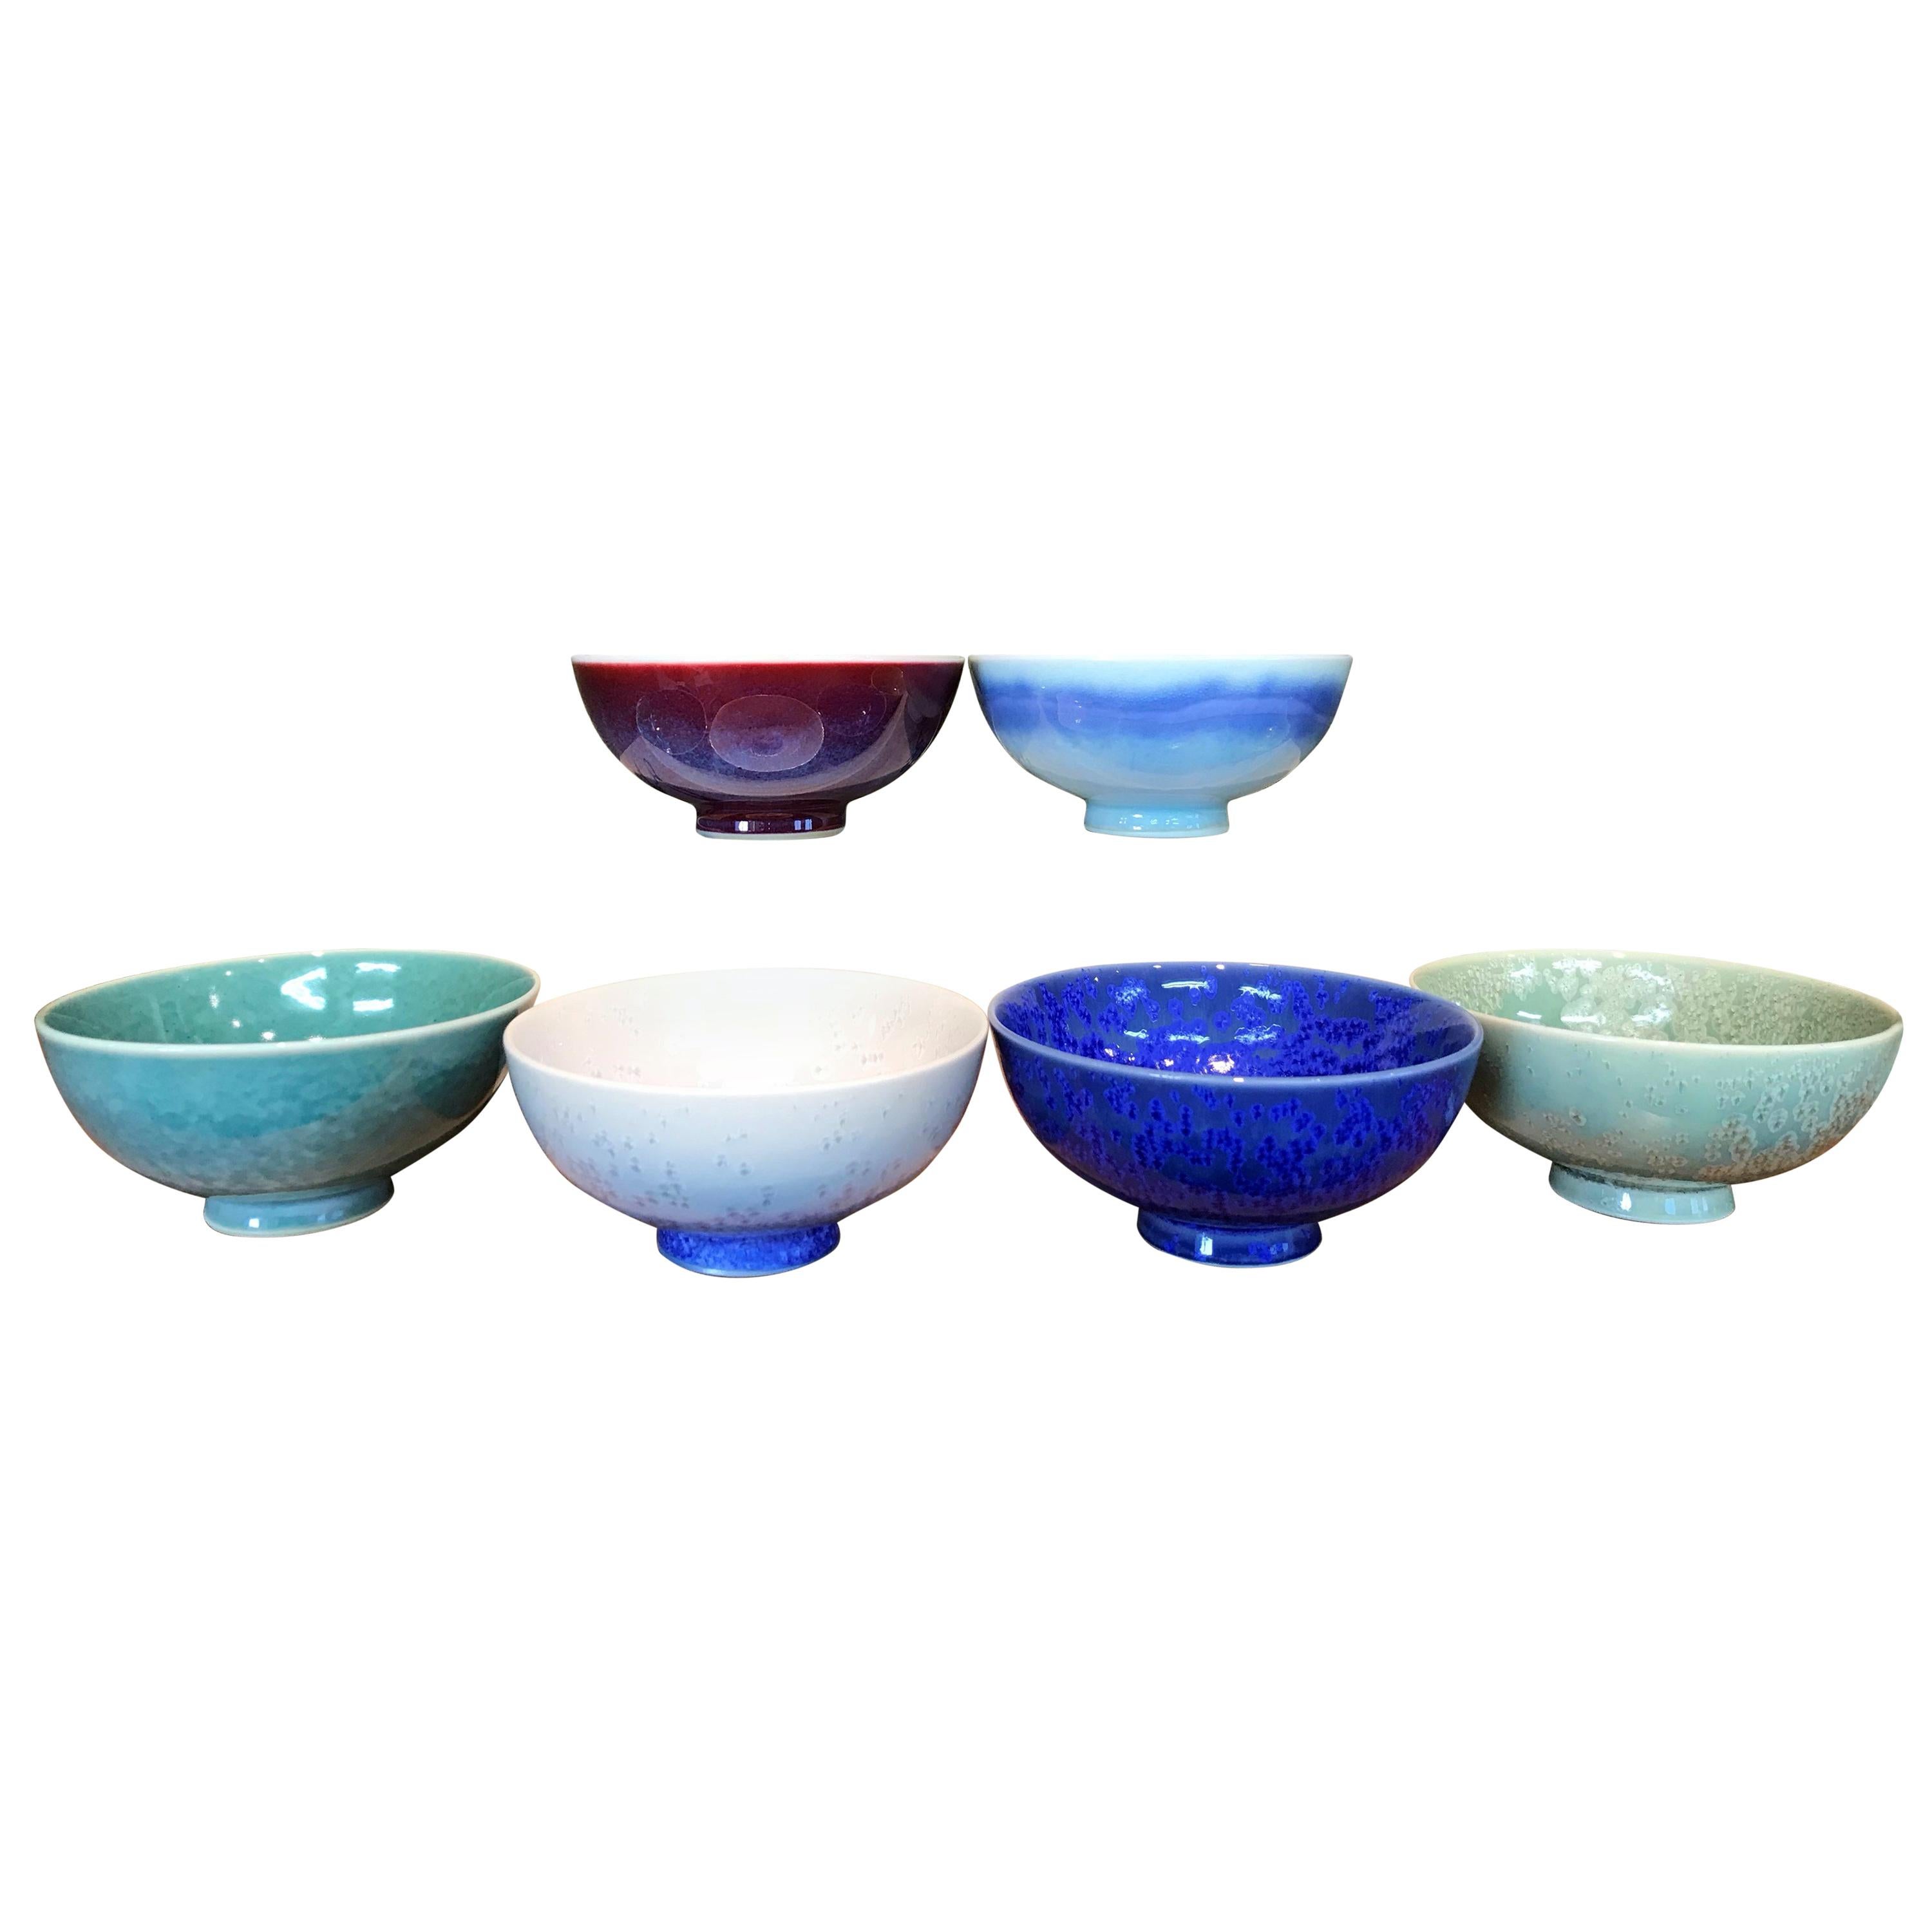 Unique set of six contemporary Japanese hand-glazed porcelain cafe latte/cappuccino cups, handsomely proportioned and masterfully glazed in the artist's signature patterns and colors, blue, wine-red, green and white, signed pieces by widely